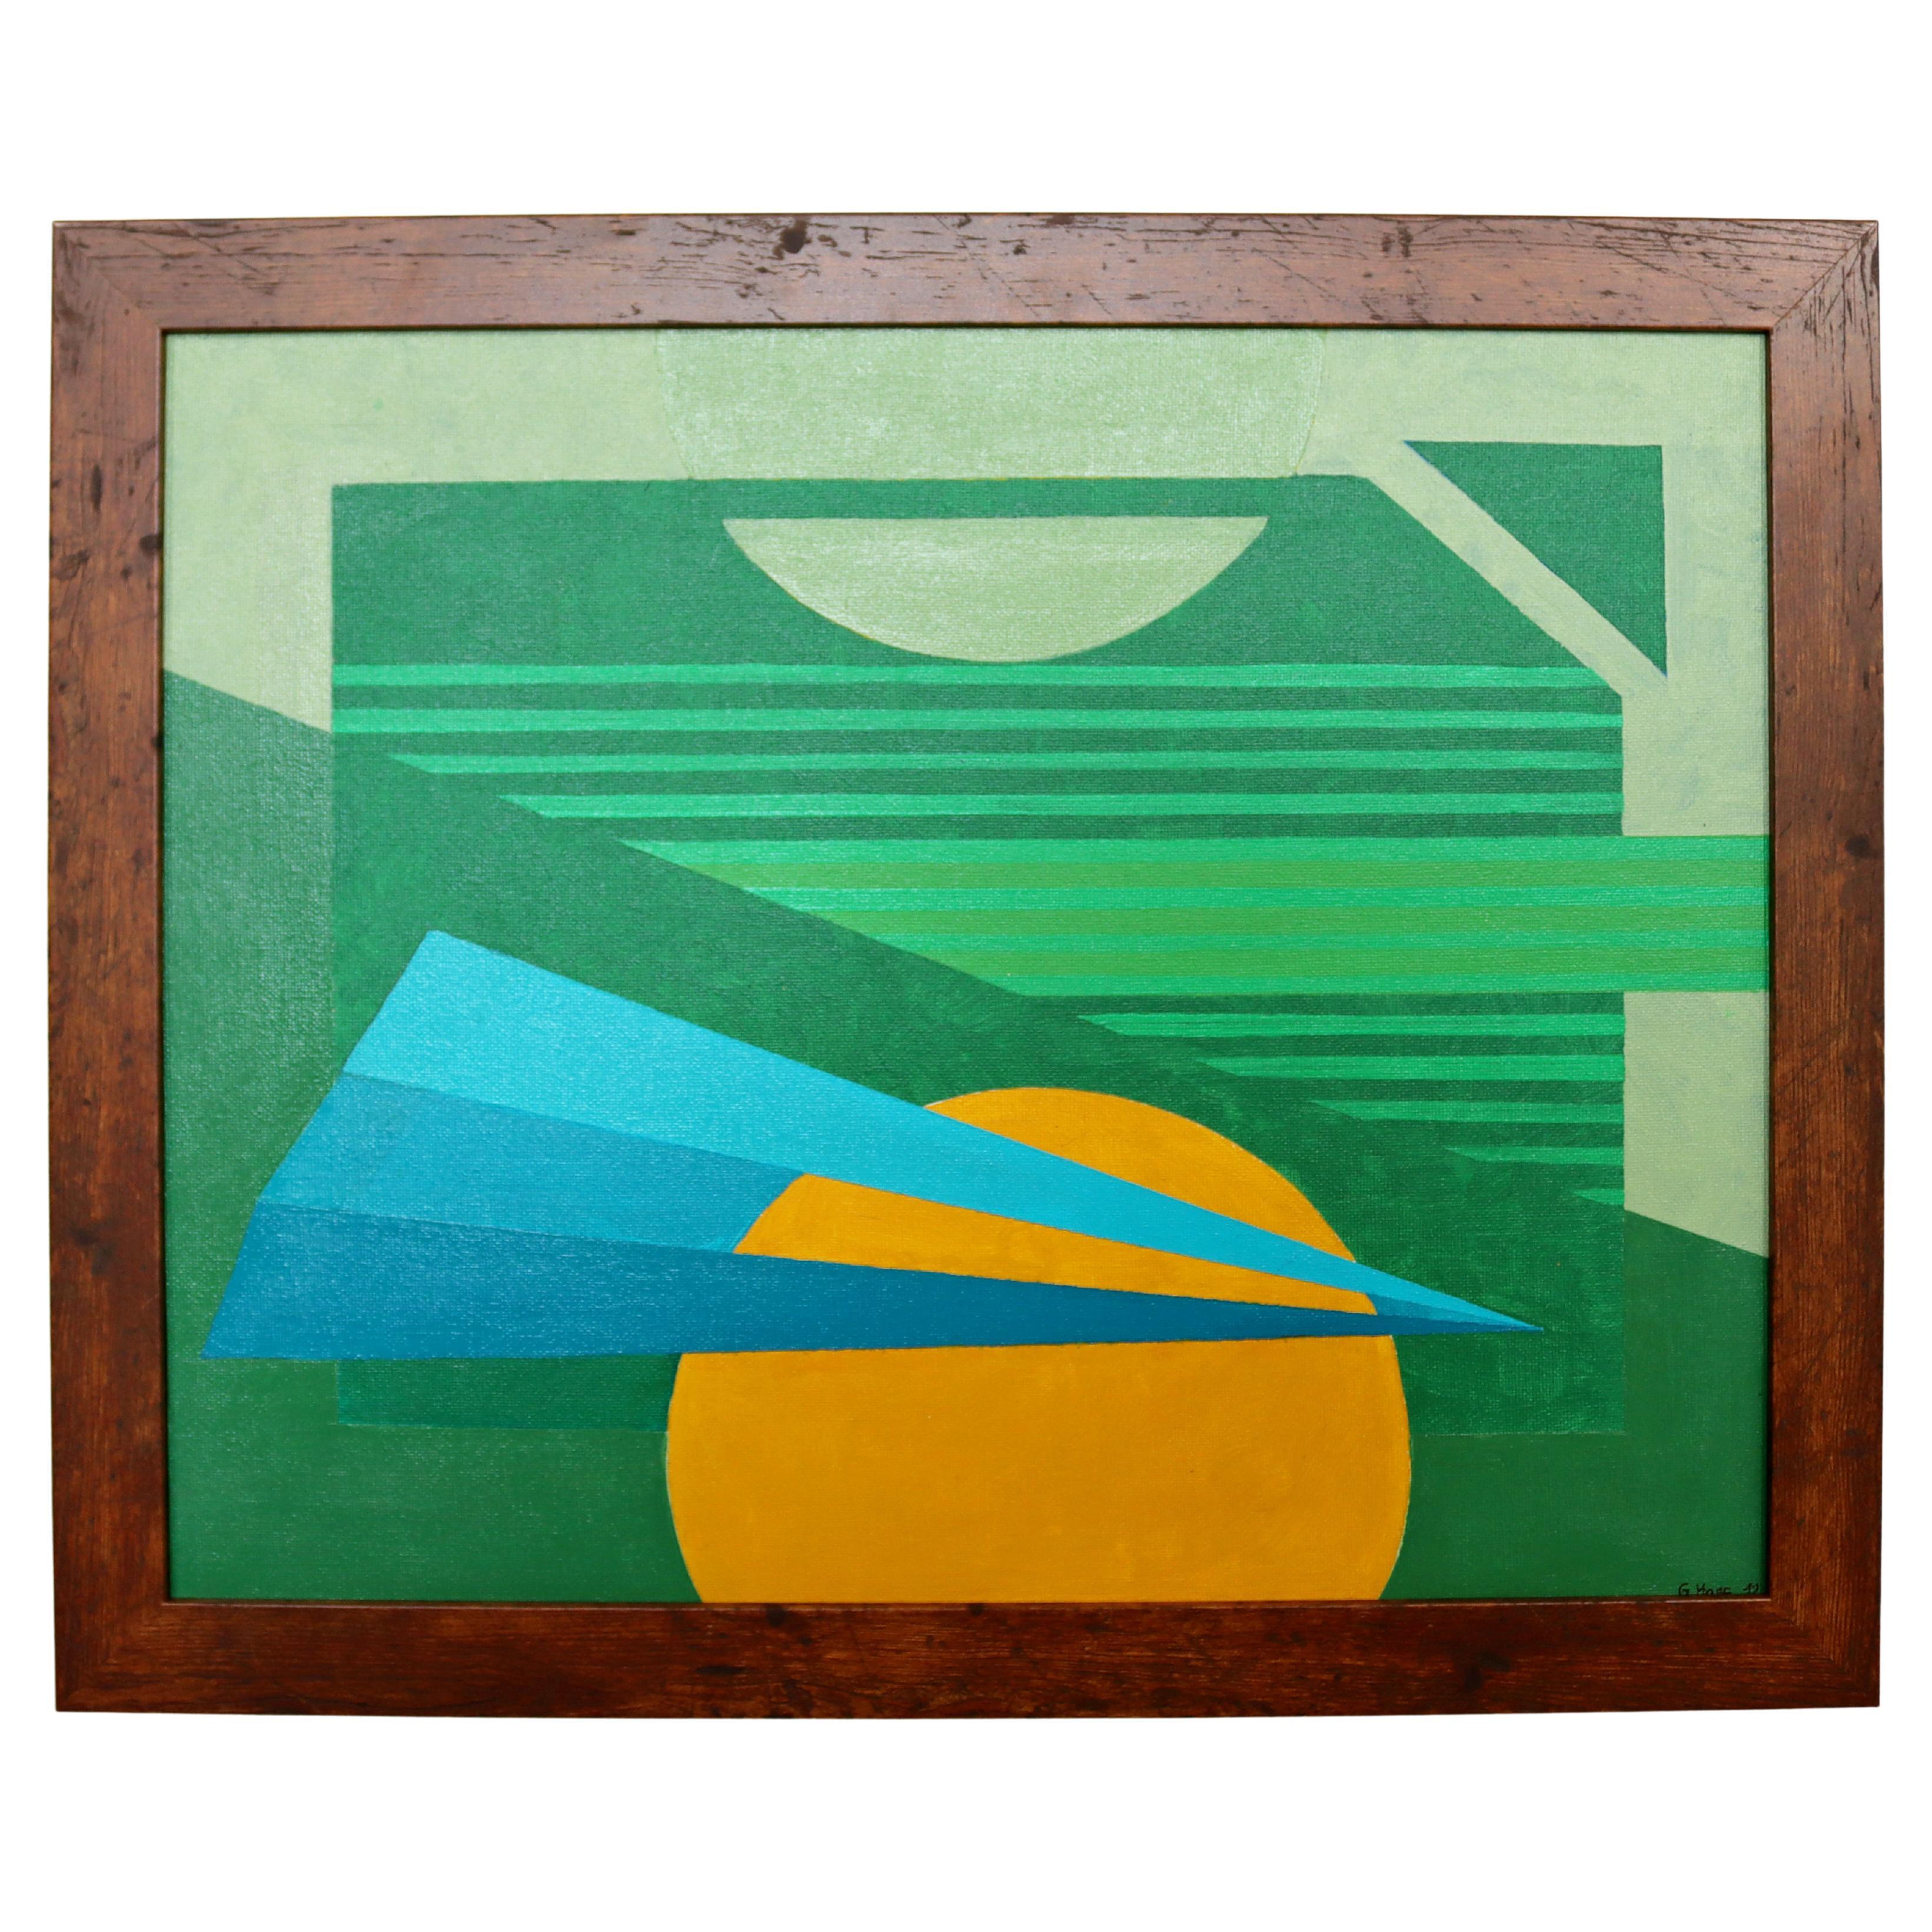 Contemporary Modernist Framed Gunda Hass Signed Acrylic Painting Green Yellow